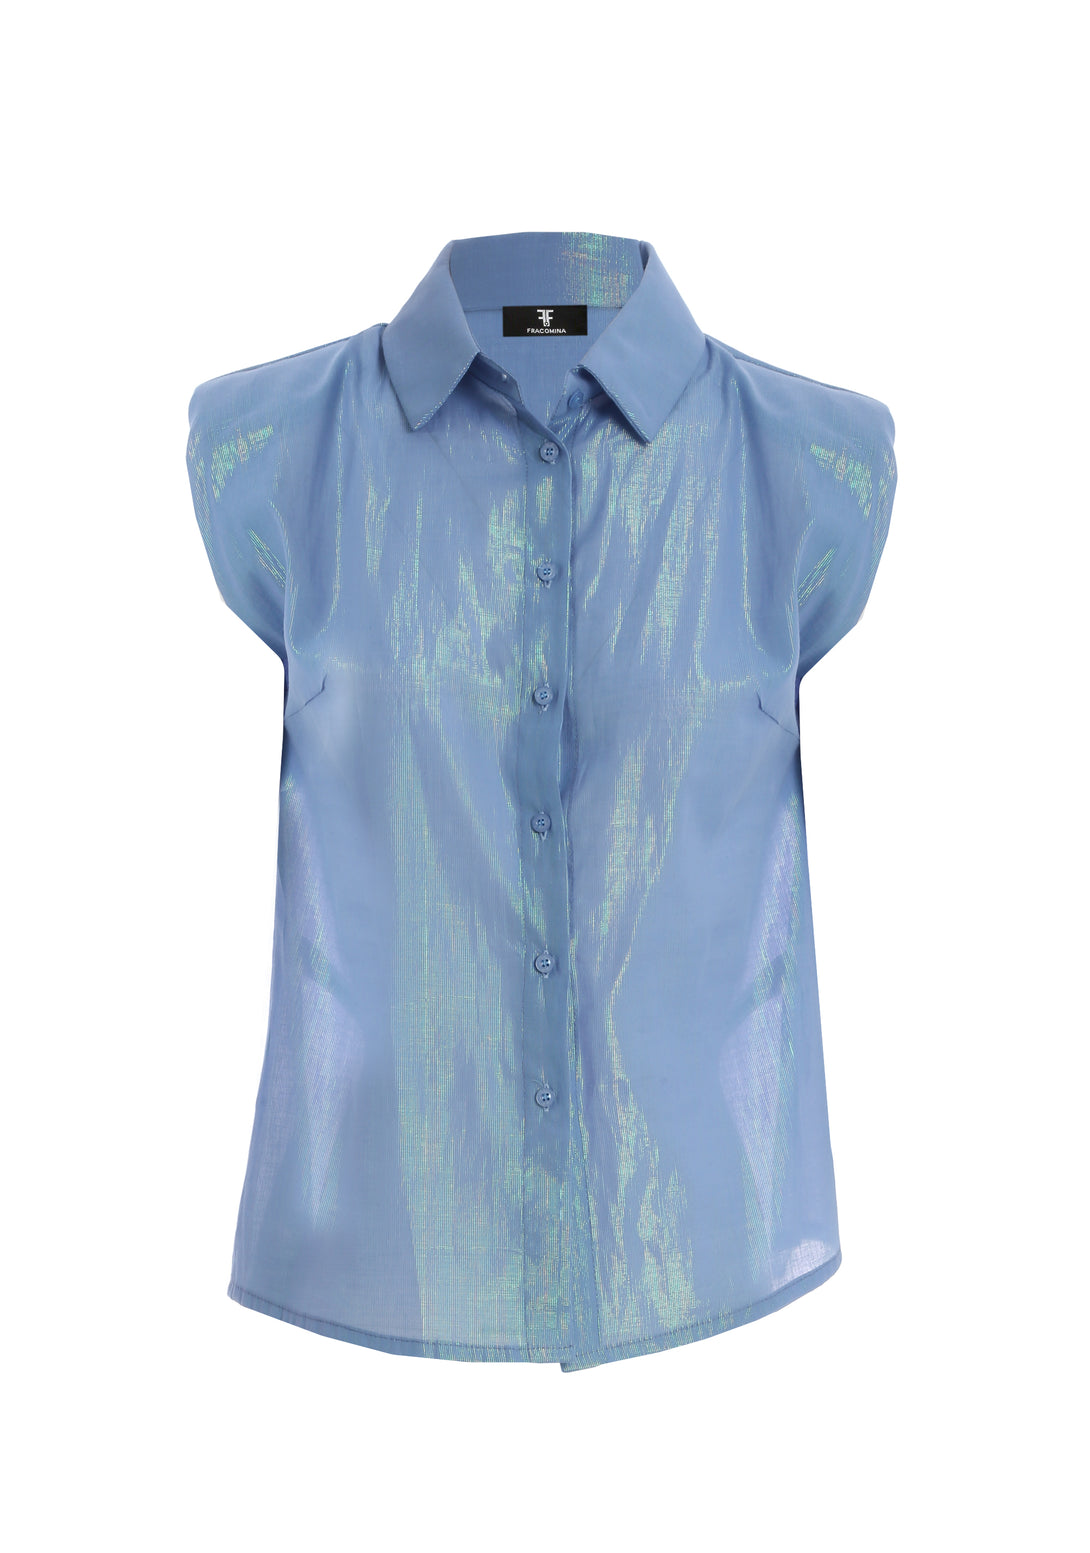 Sleeveless shirt made in shimmering fabric